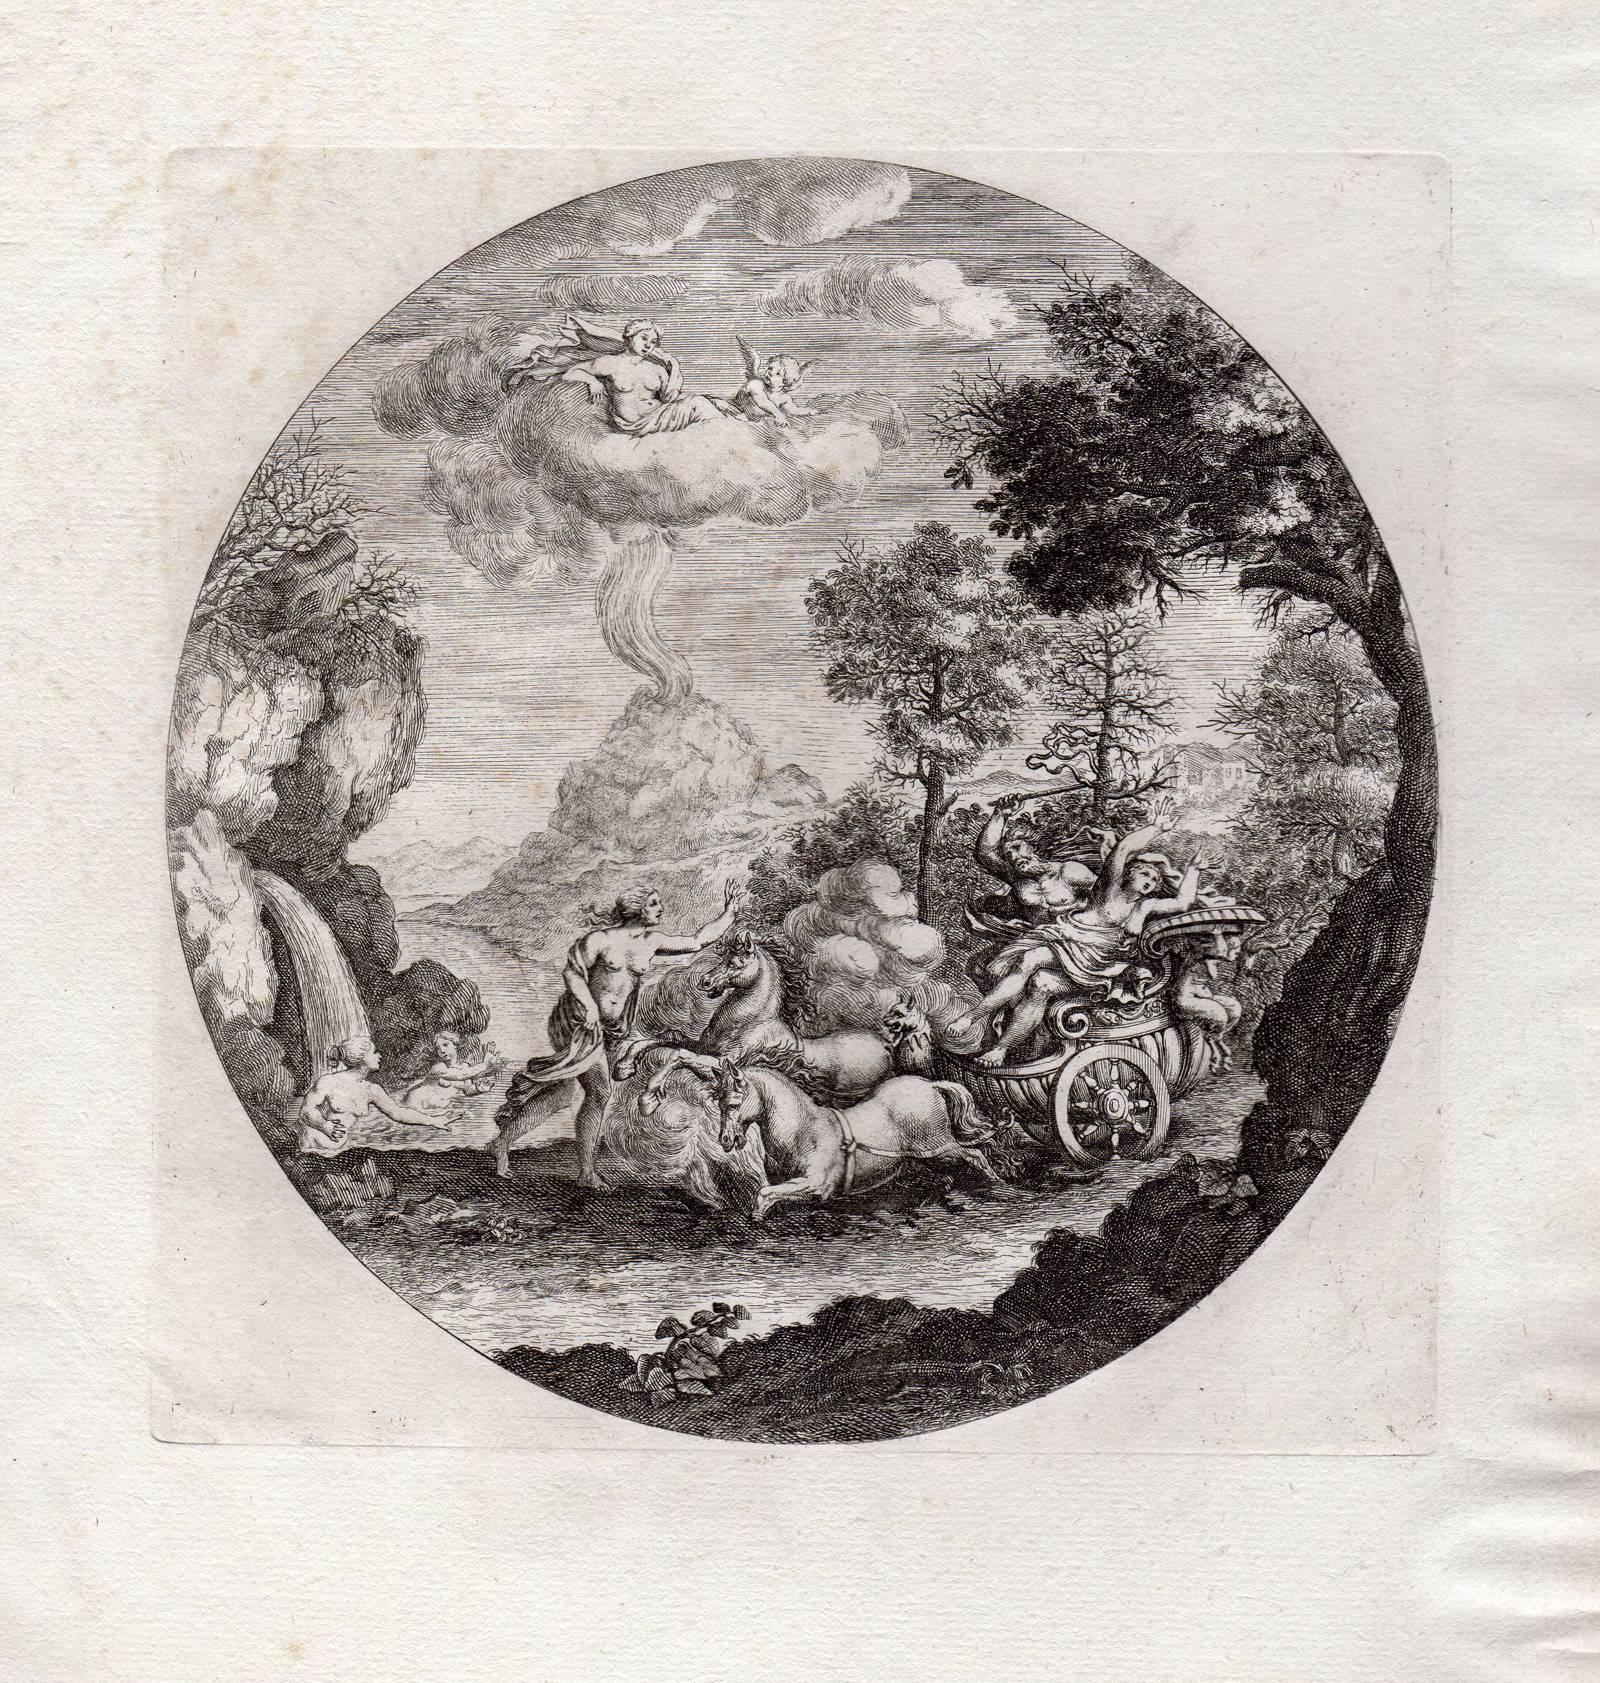 Unknown Print - Untitled - The rape of Proserpina by Pluto.